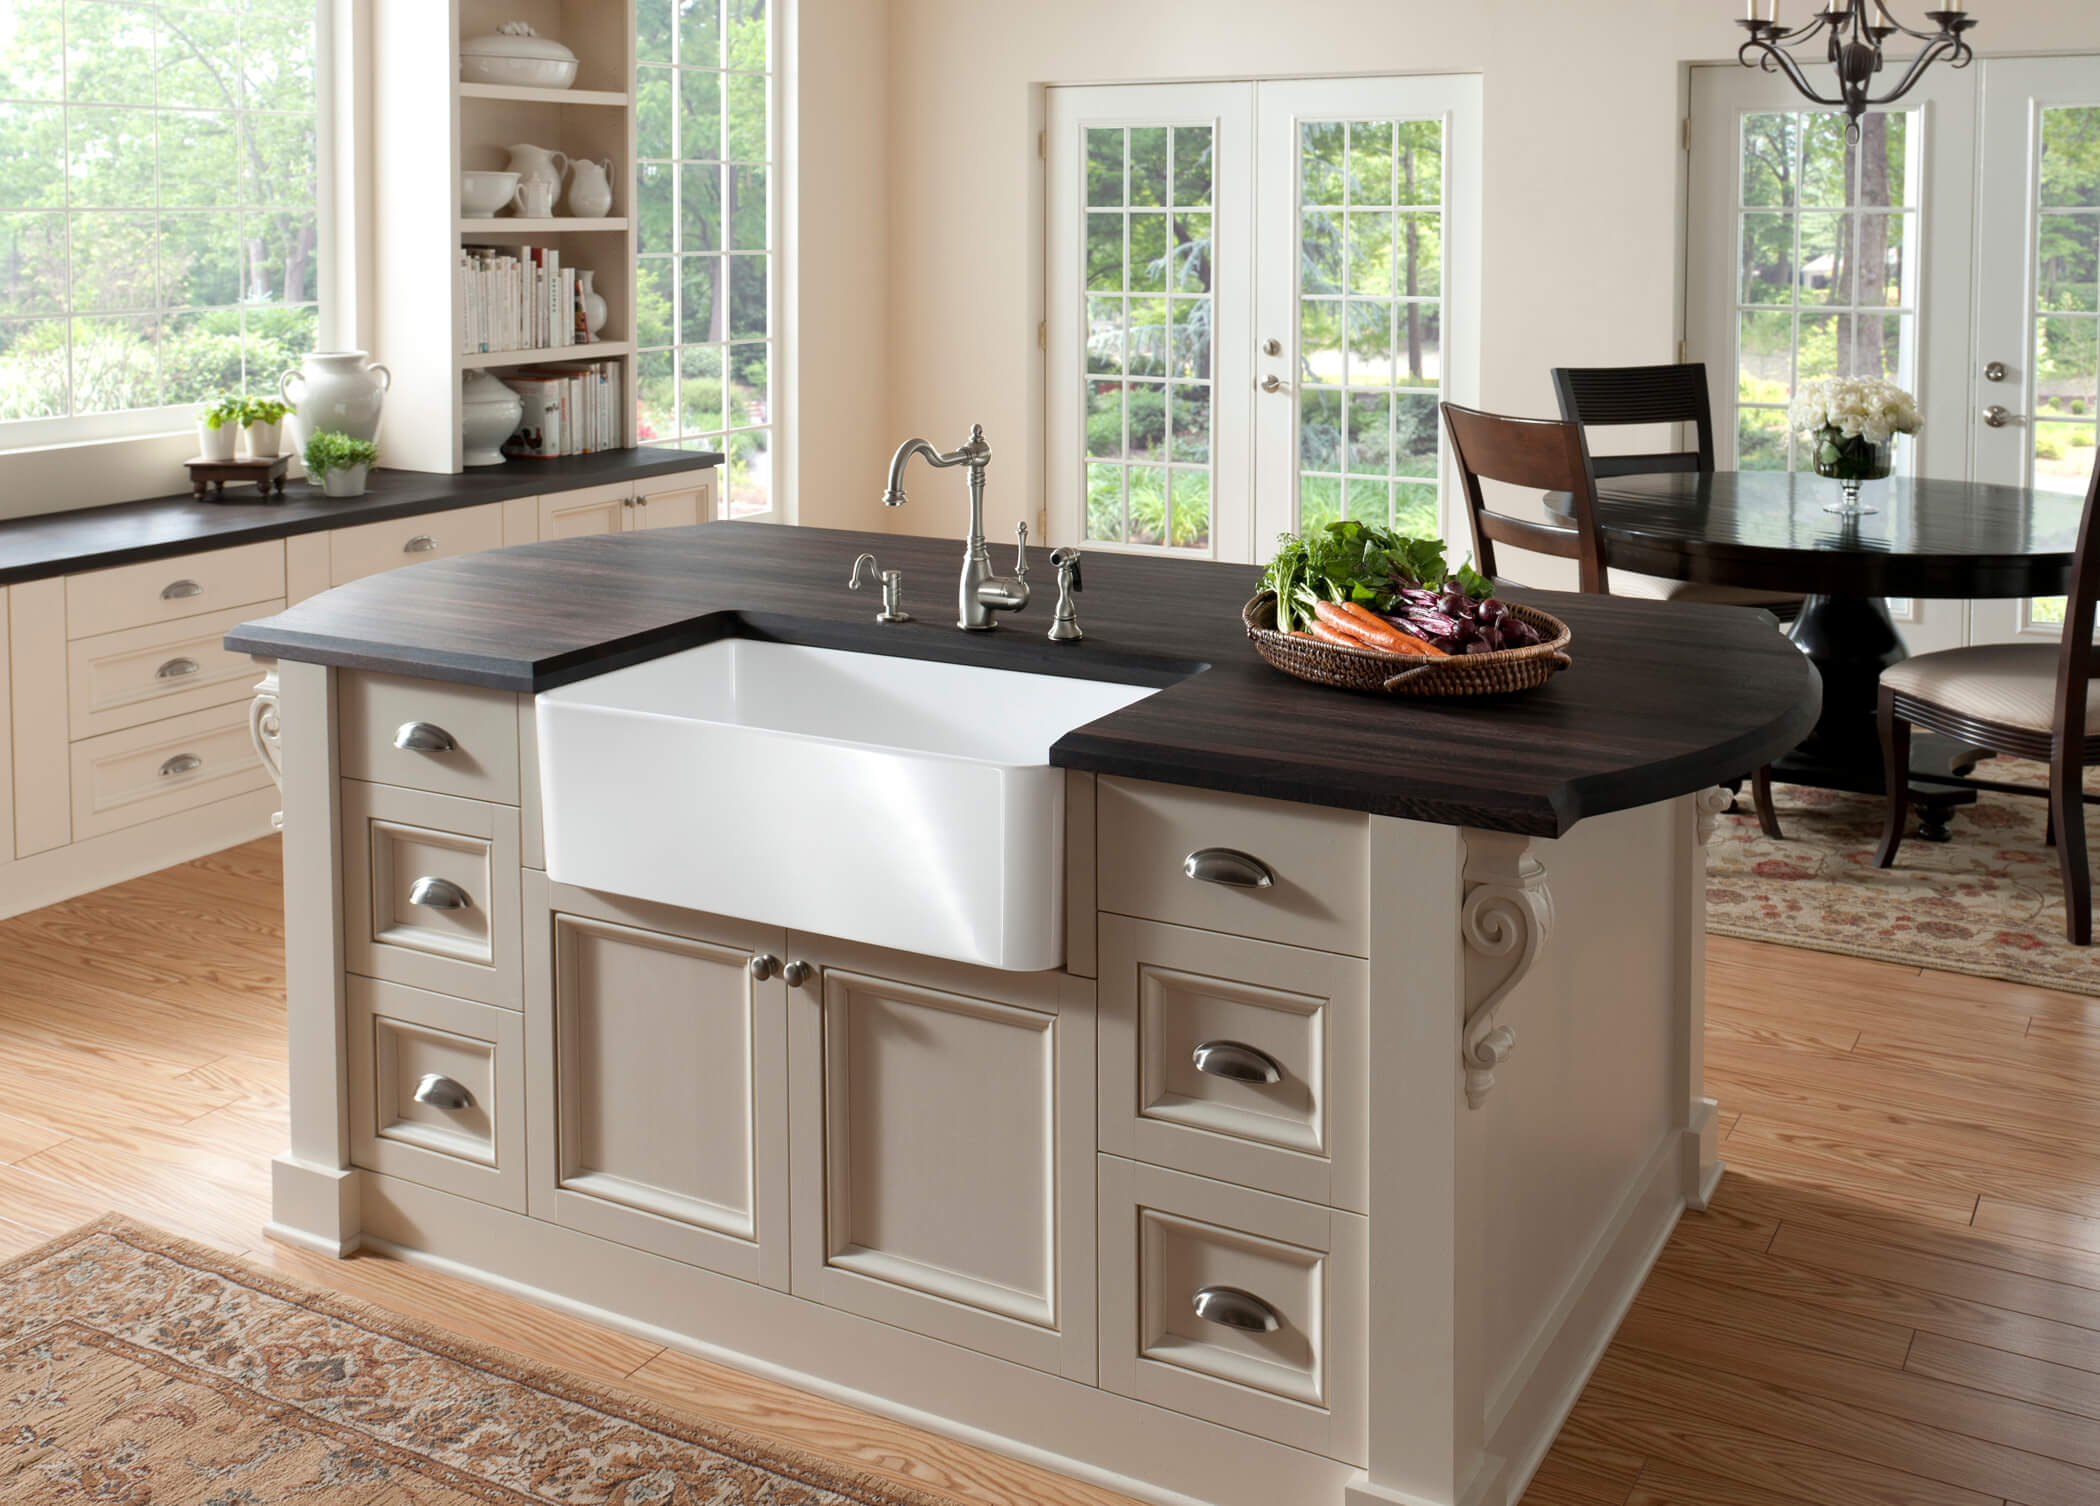 installing a kitchen island with sink